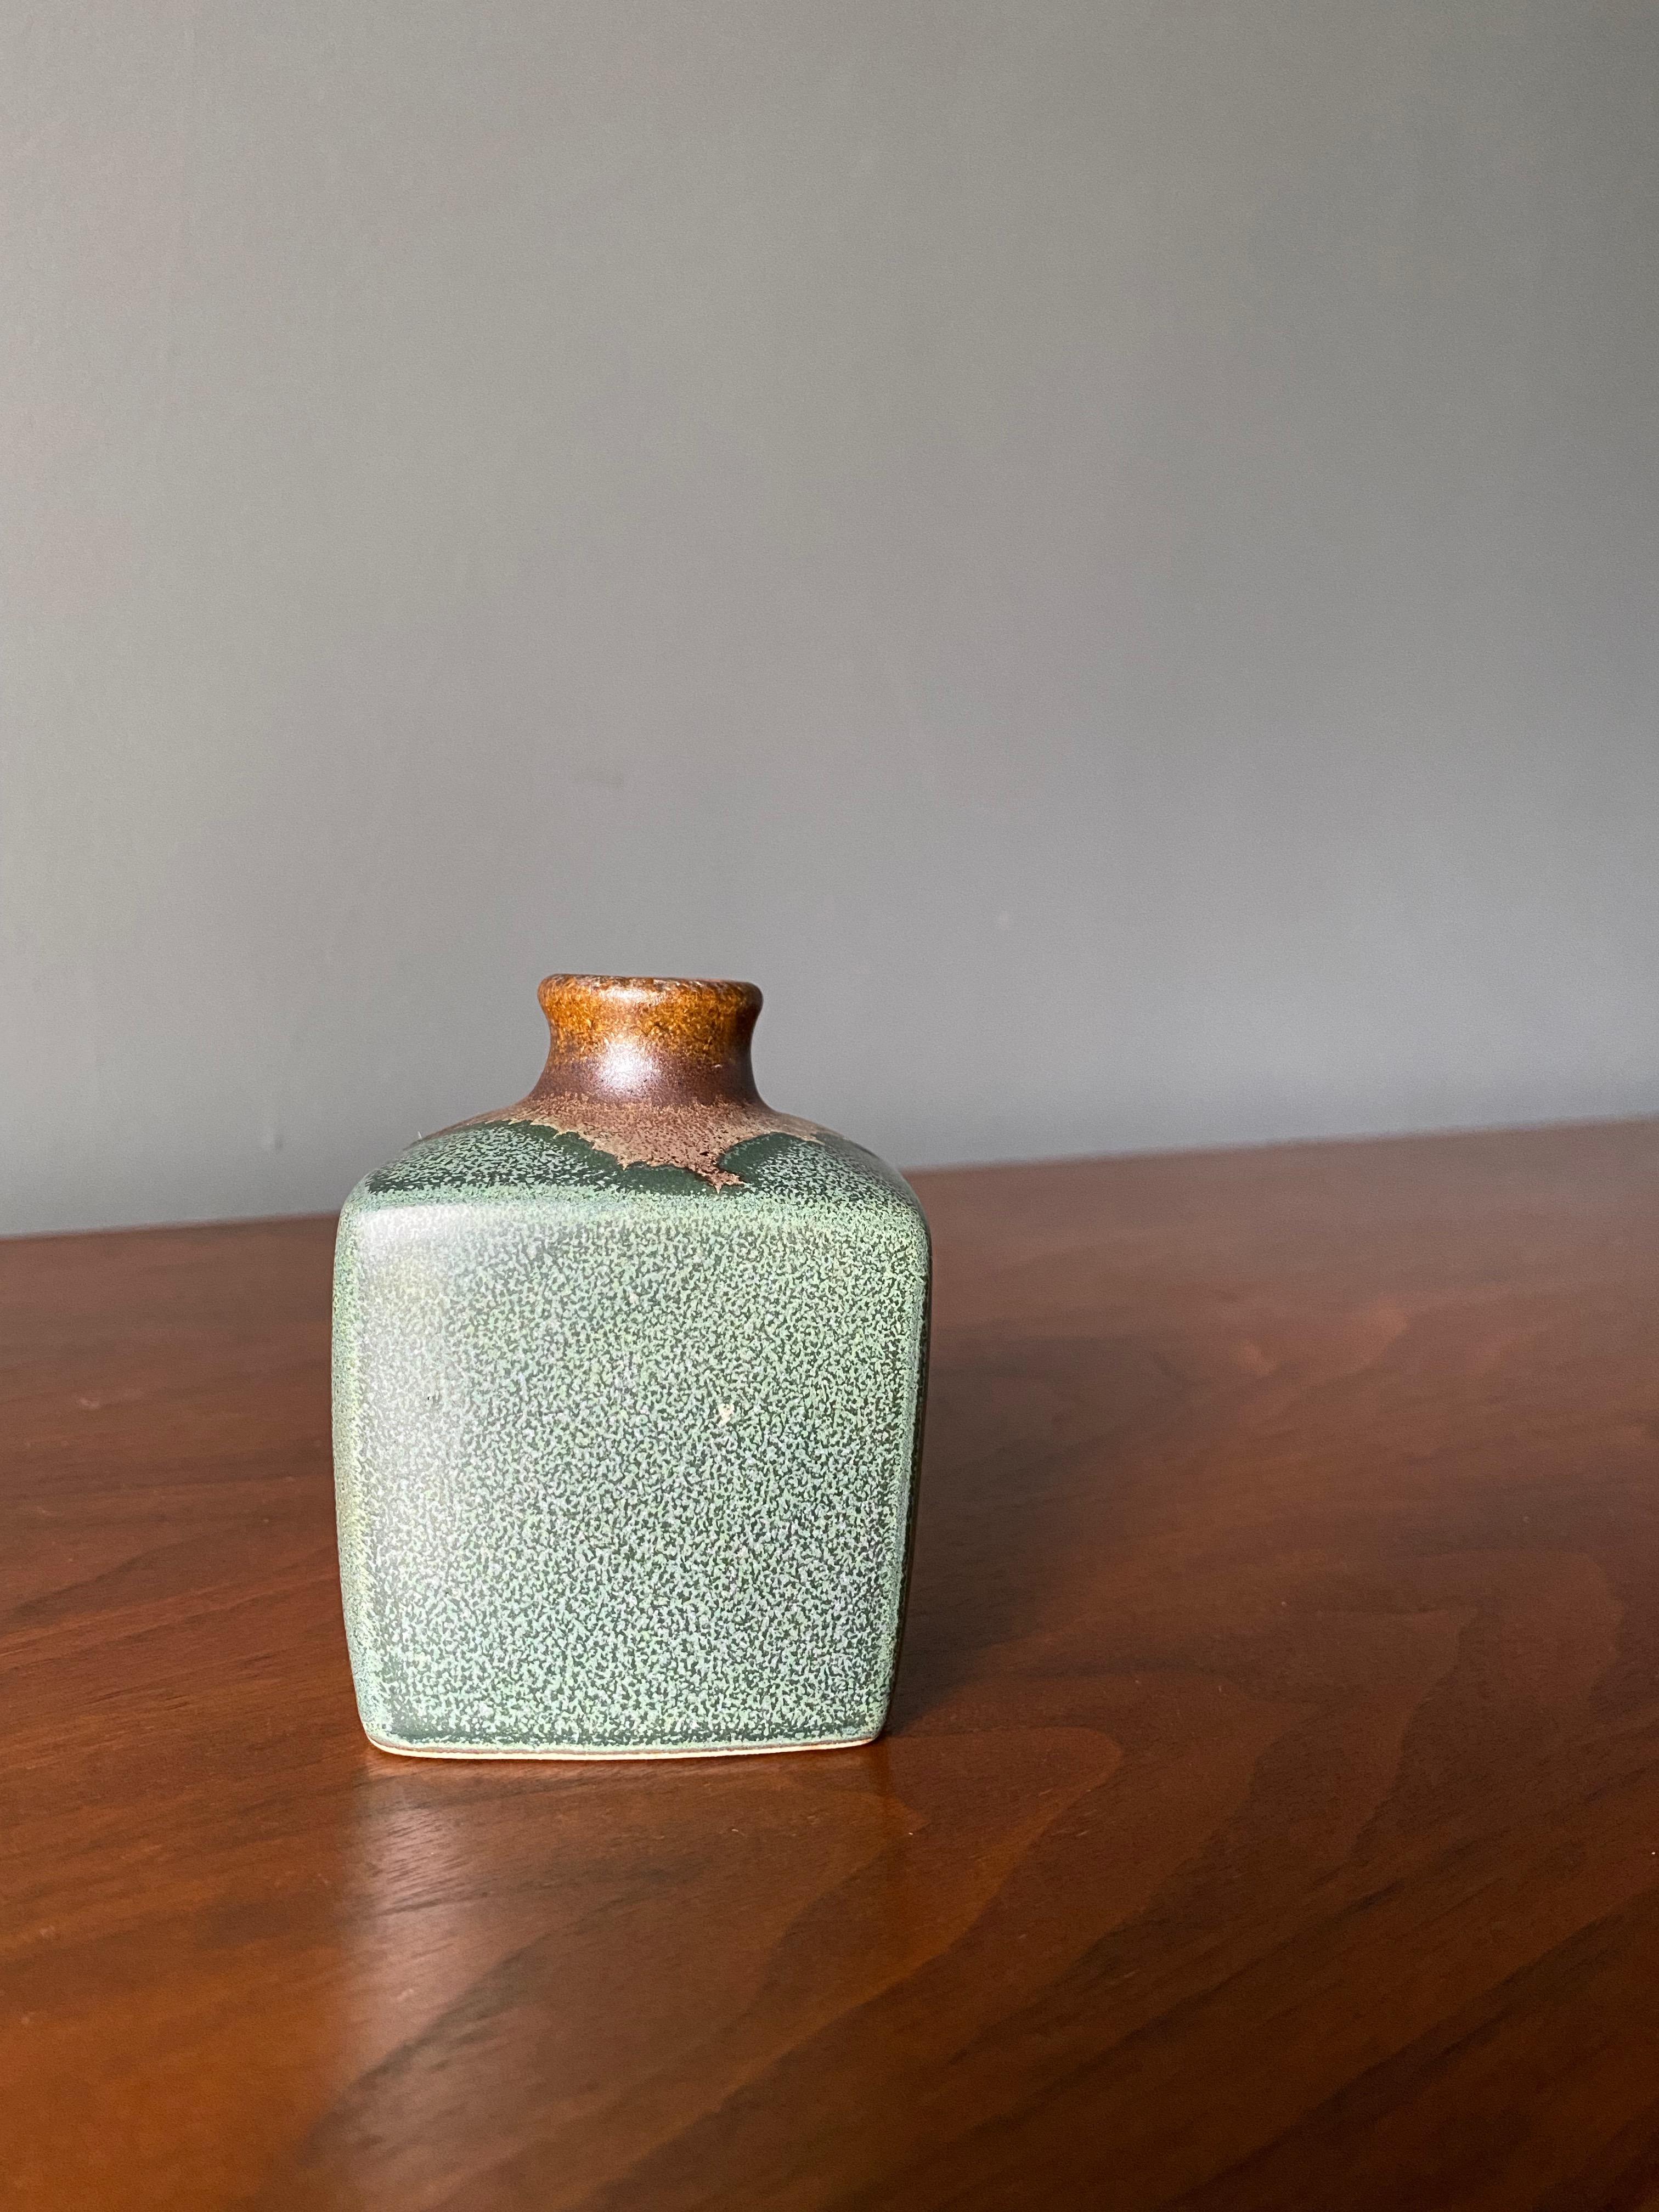 Vintage weed pot or bud vase. Beautiful green glaze. An excellent accent piece in any home or office.